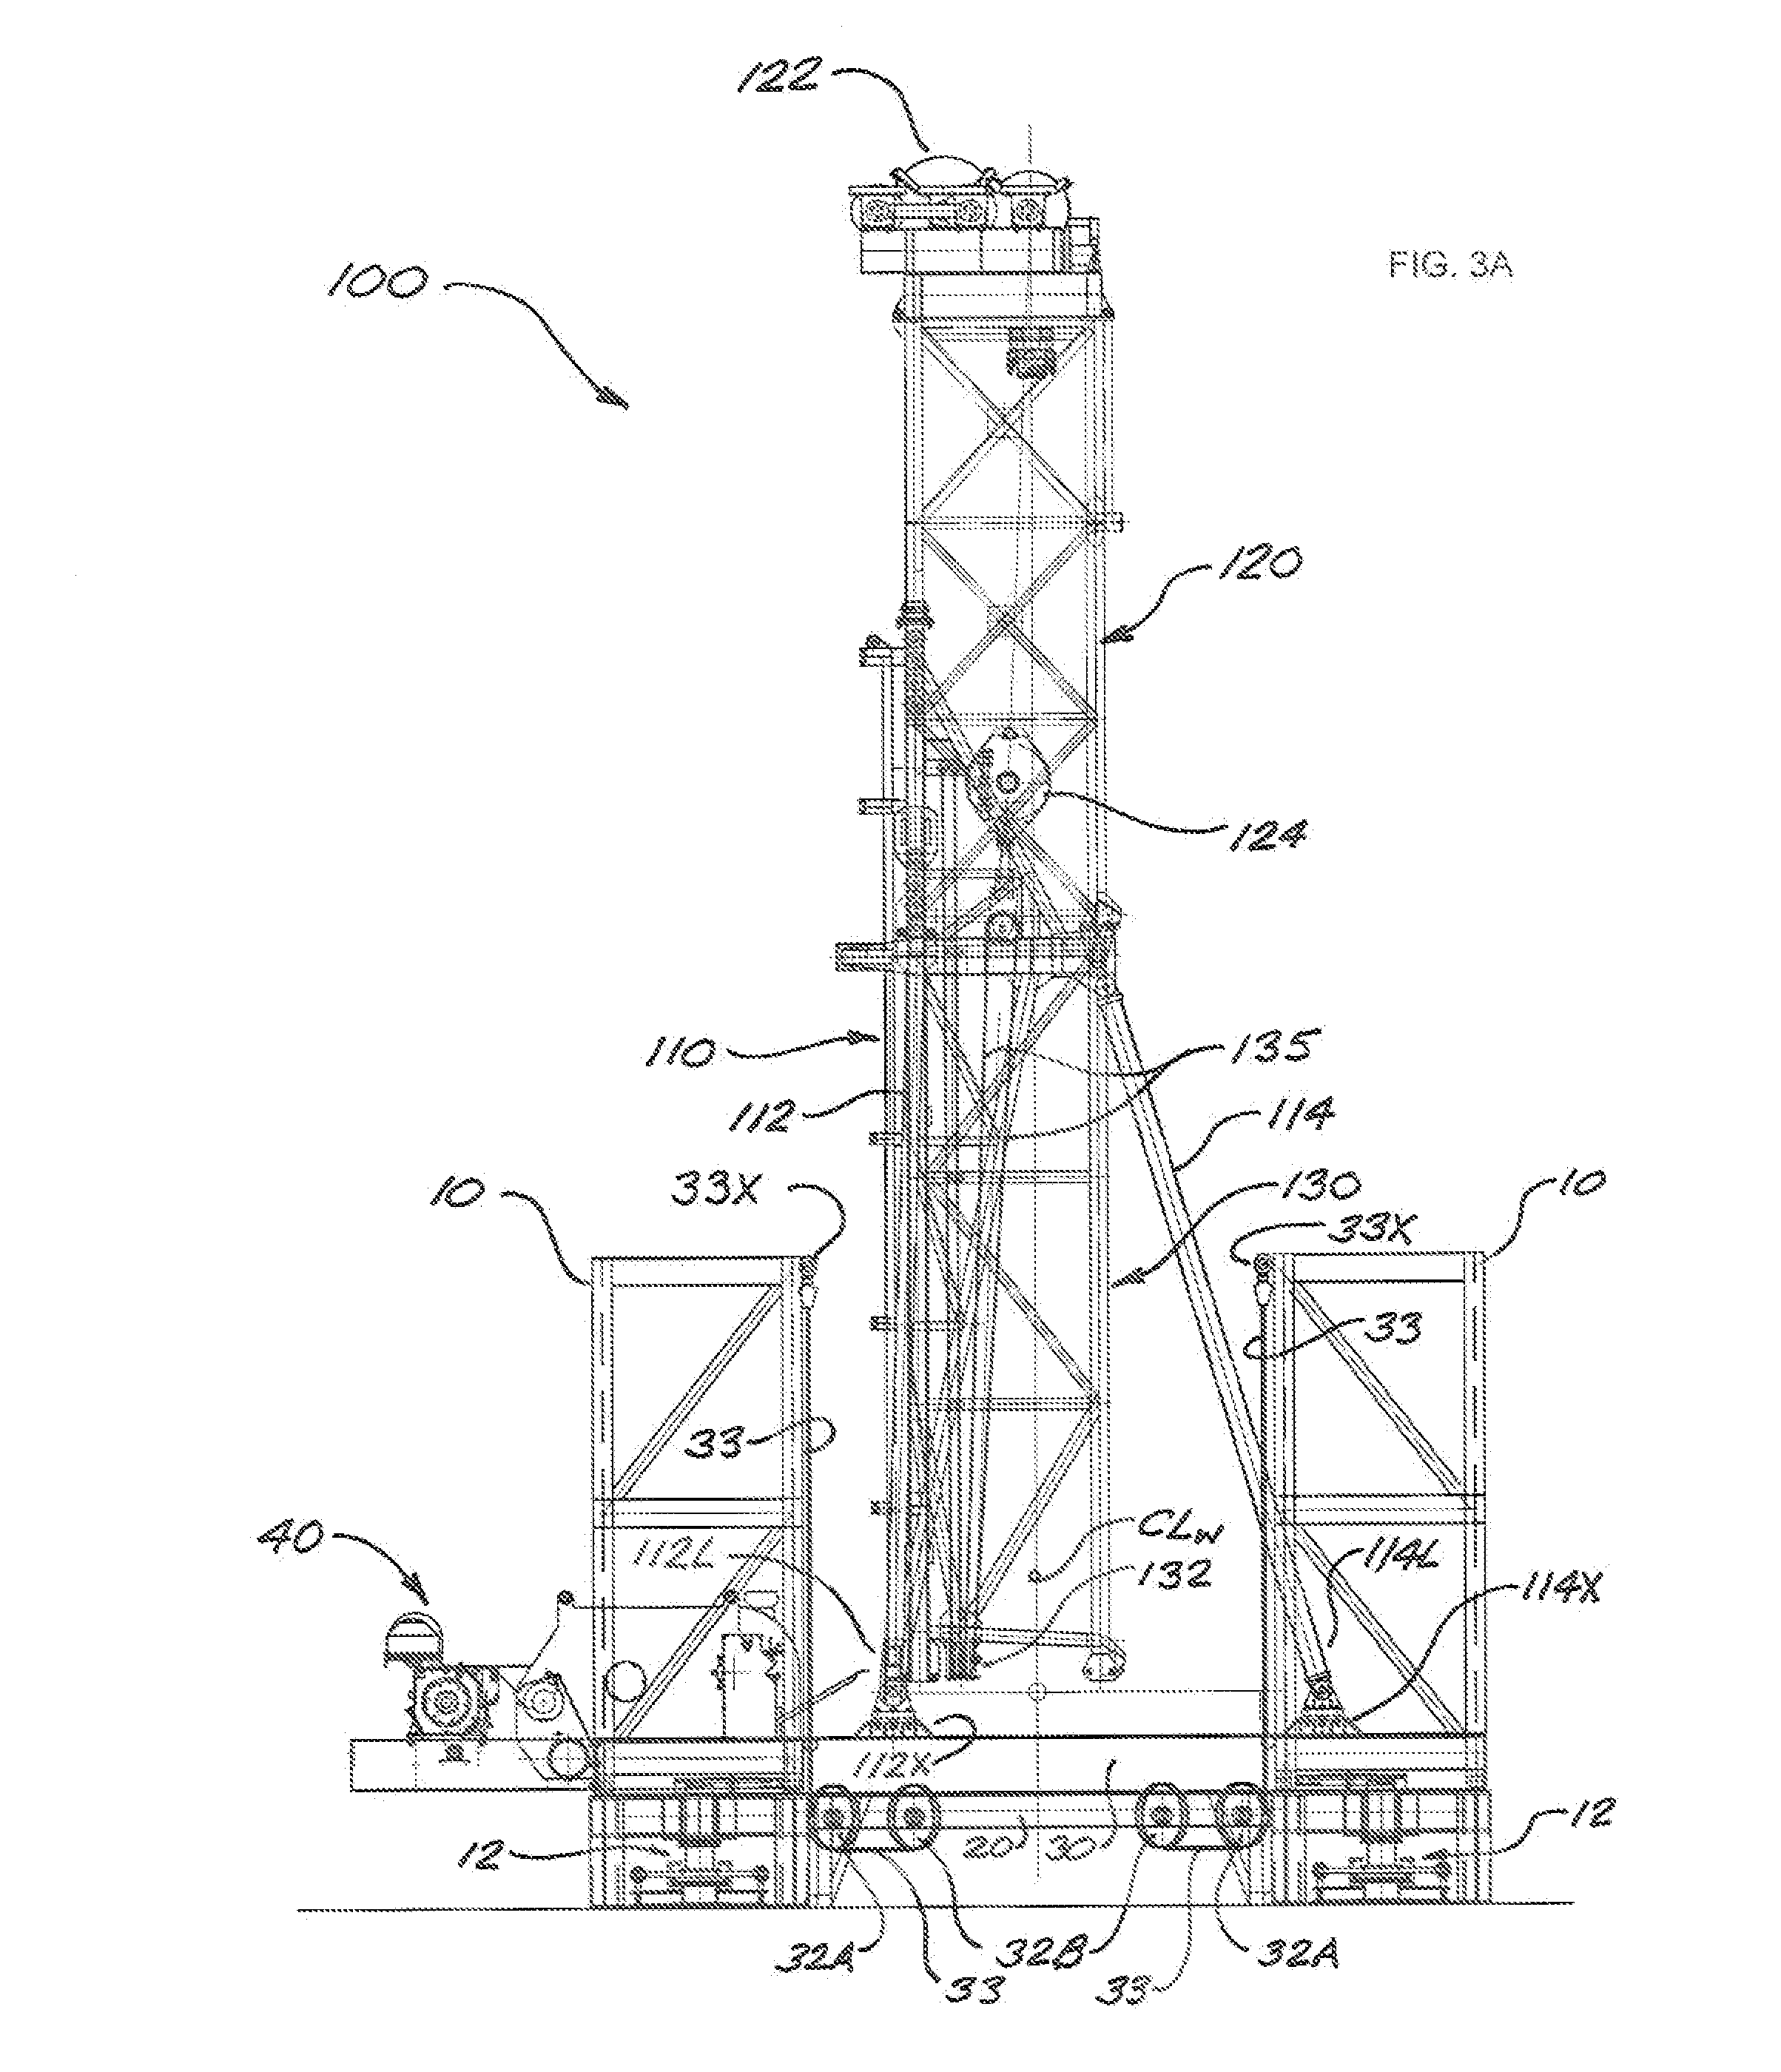 Drilling rig system with self-elevating drill floor